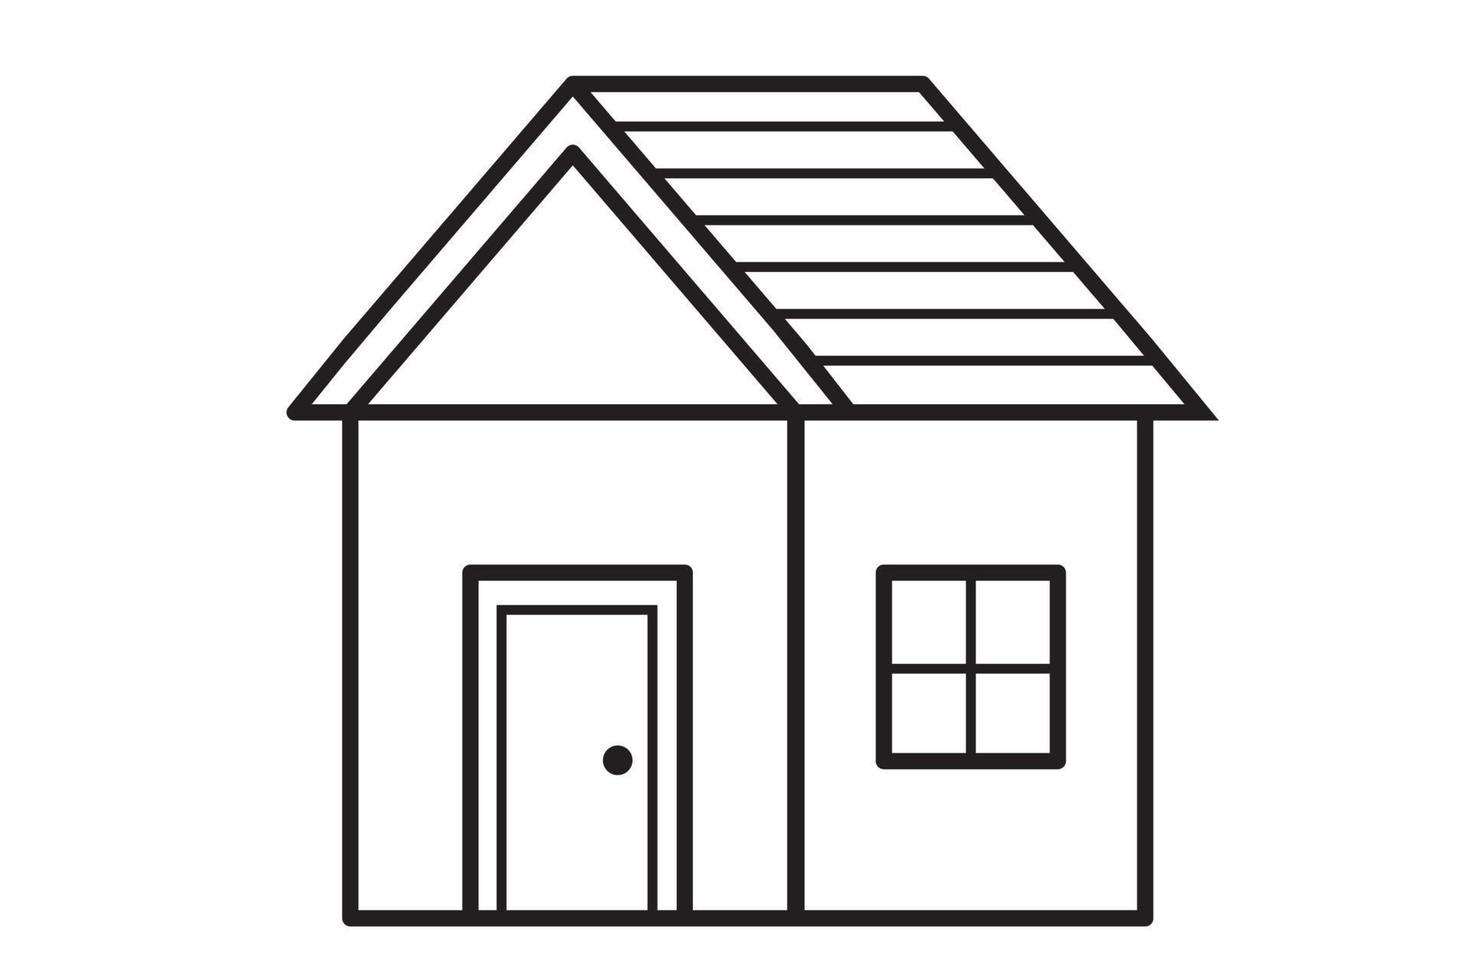 Black and white house illustration. Black thin line art house icon, outline symbol illustration. Small house with door and window. Little vector home.